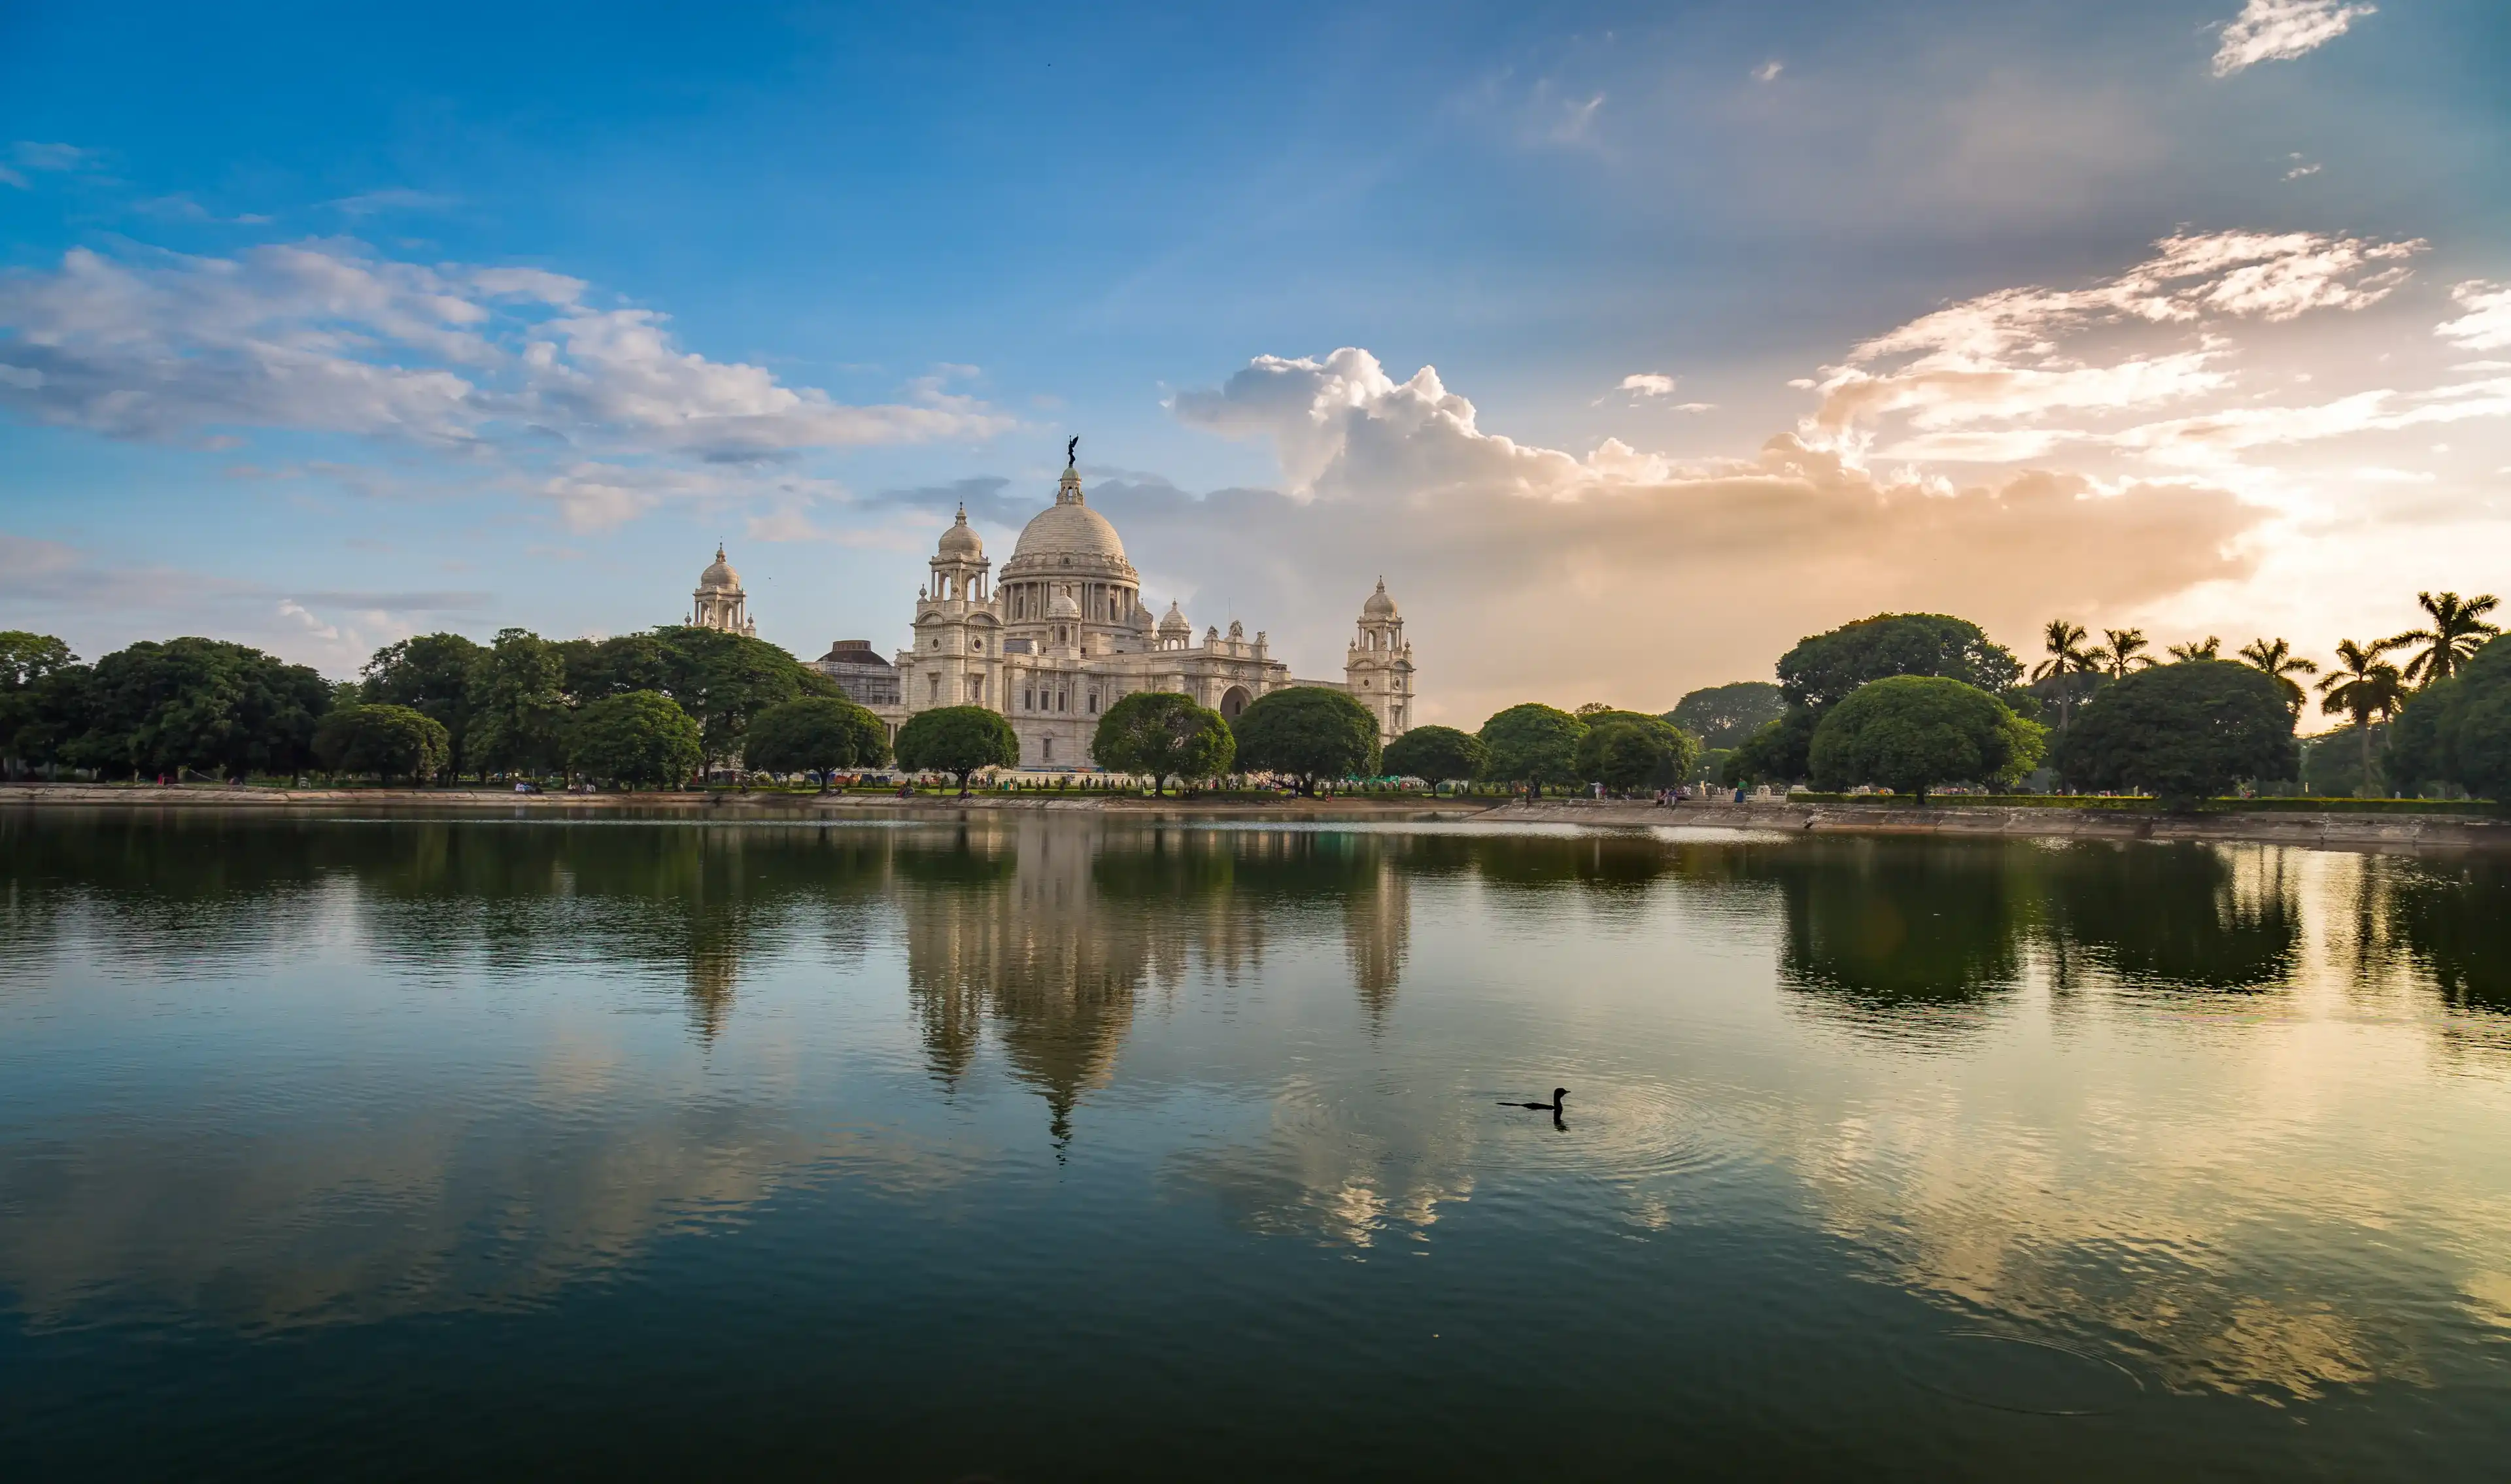 Victoria Memorial Kolkata at sunset with vibrant moody sky and mirror refections in water. Victoria Memorial is a monument and museum built in the memory of Queen Victoria in 1921 at Kolkata, India.